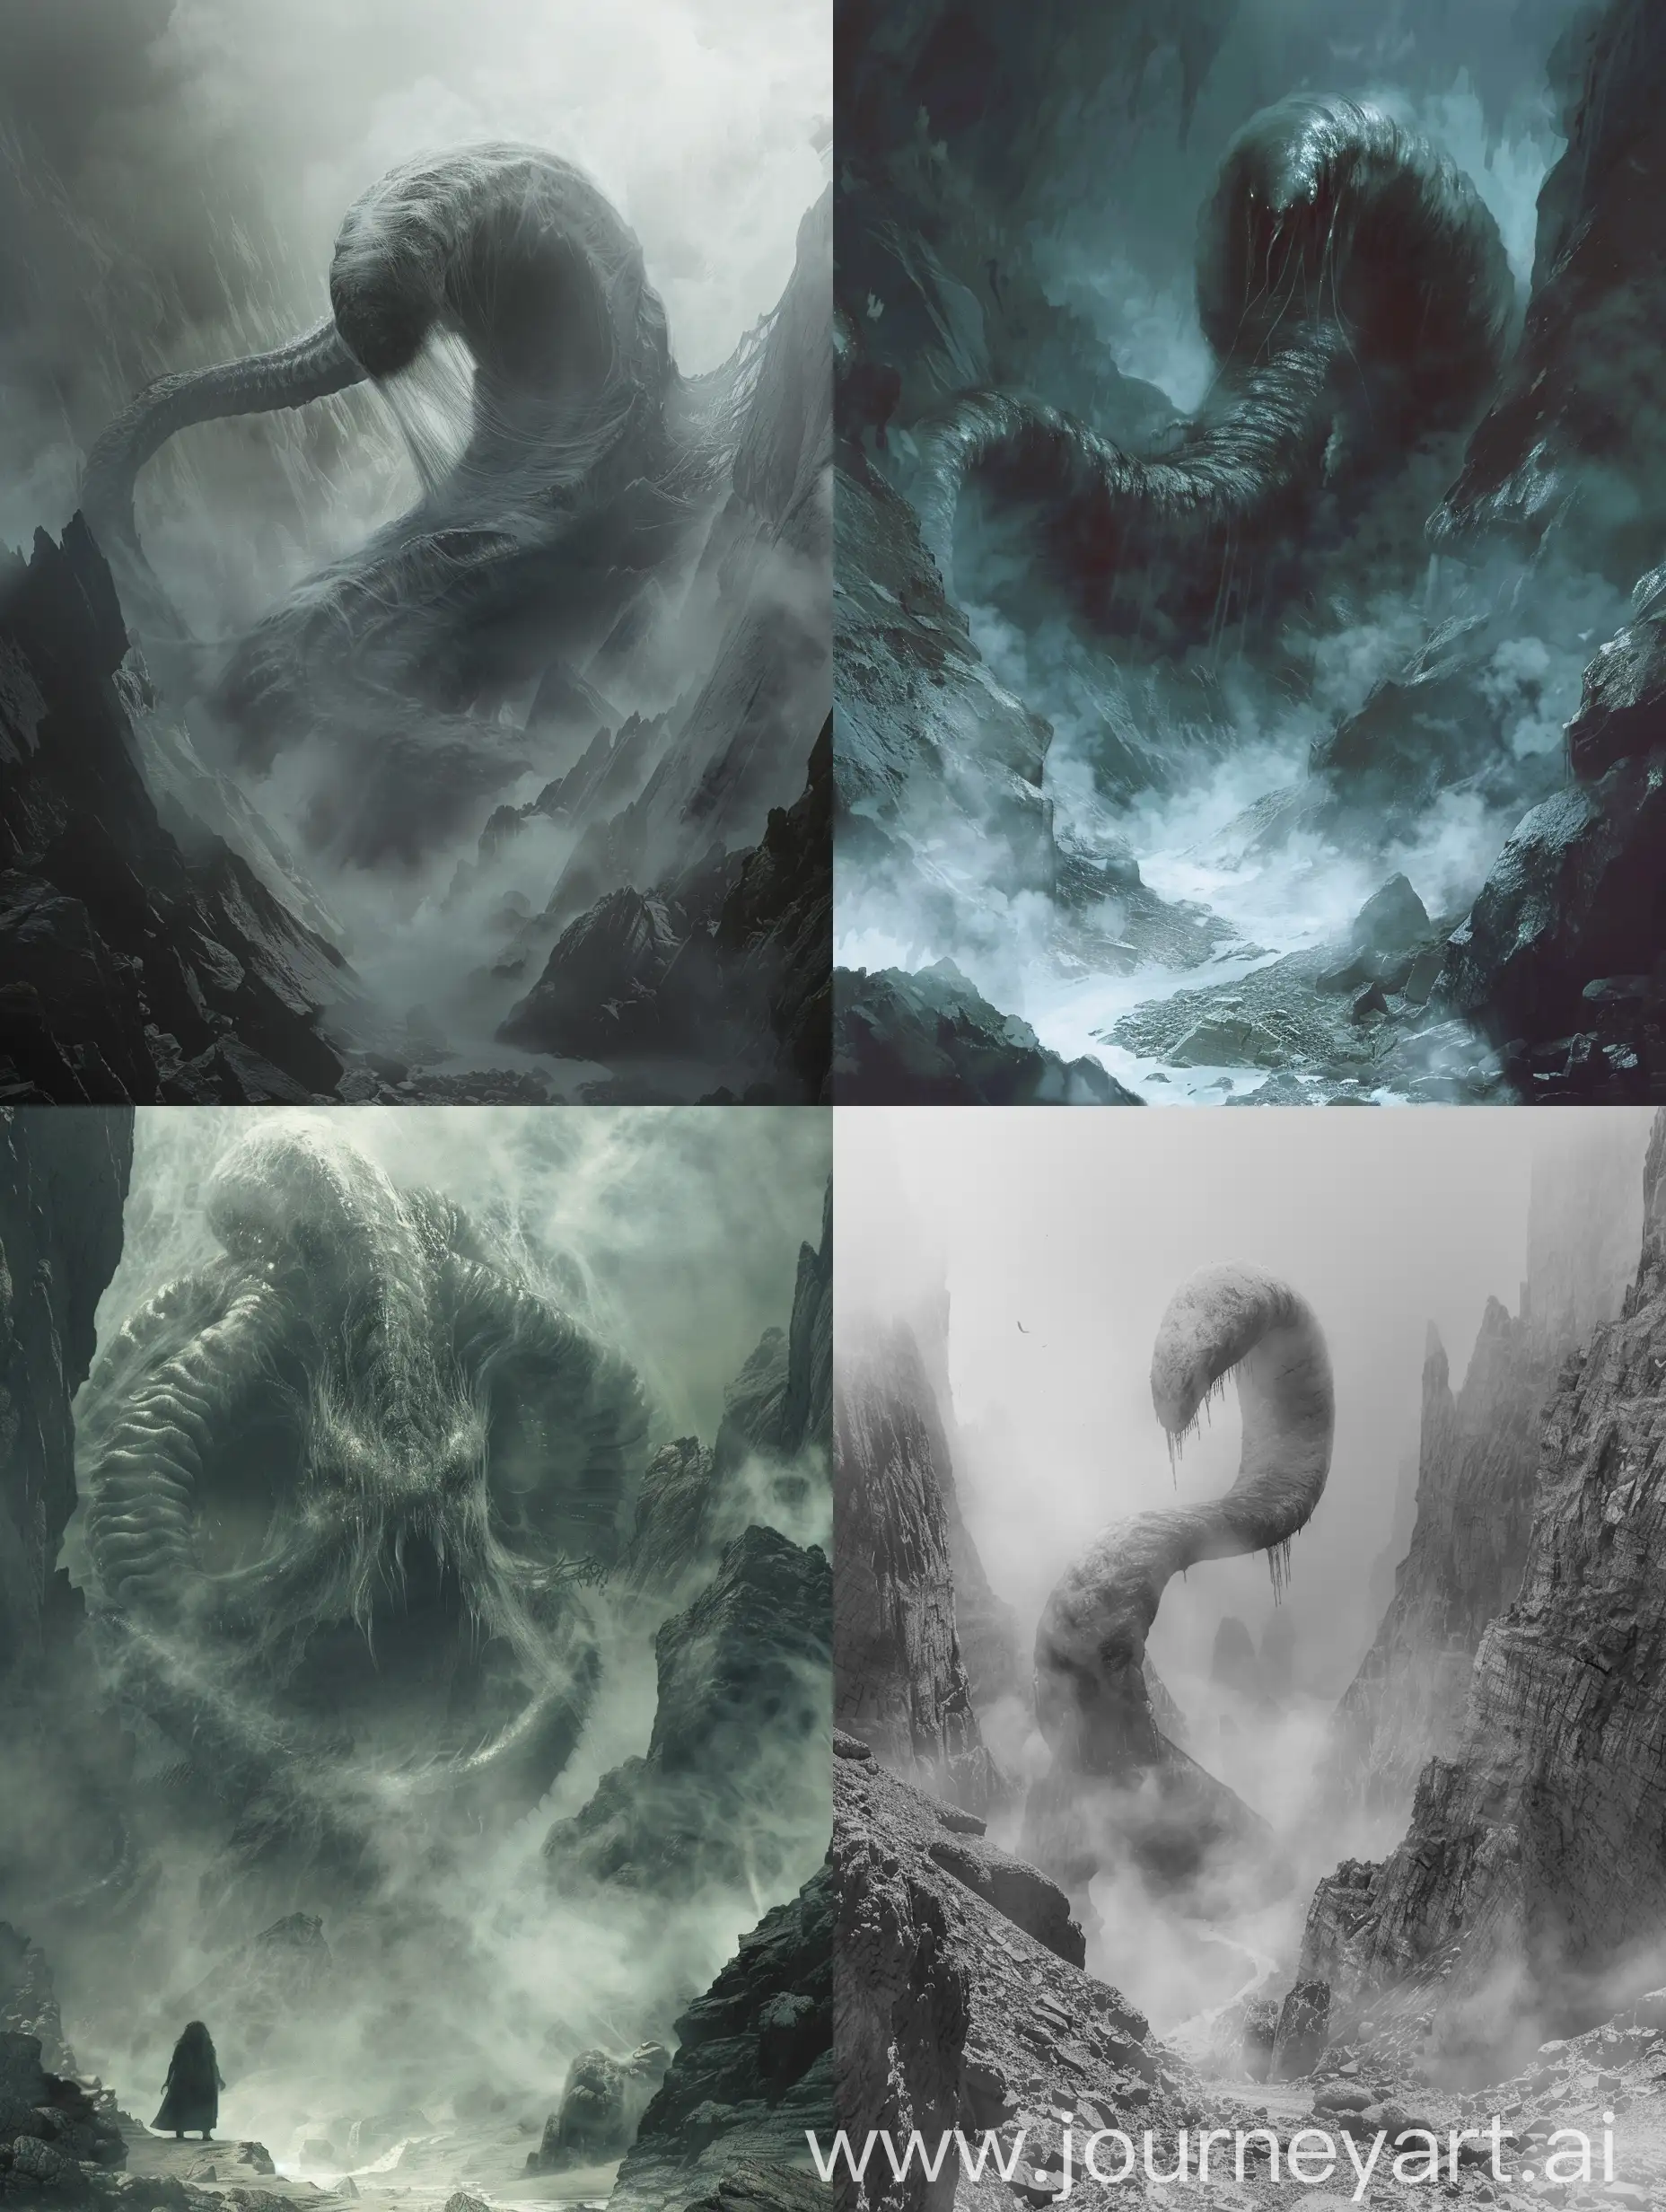 ((A monstrous Like a giant worm and faceless monster with an appearance similar to a mutated worm whose body is shrouded in fog in the depths of the caves under the erth)), (the depths of the earth:1.5), a fearful place, full of fog, thick fog, sharp rocks, endless, formidable, huge, towards the center of the earth, very uneven, very uneven, the depths of the earth, ((faceless)),